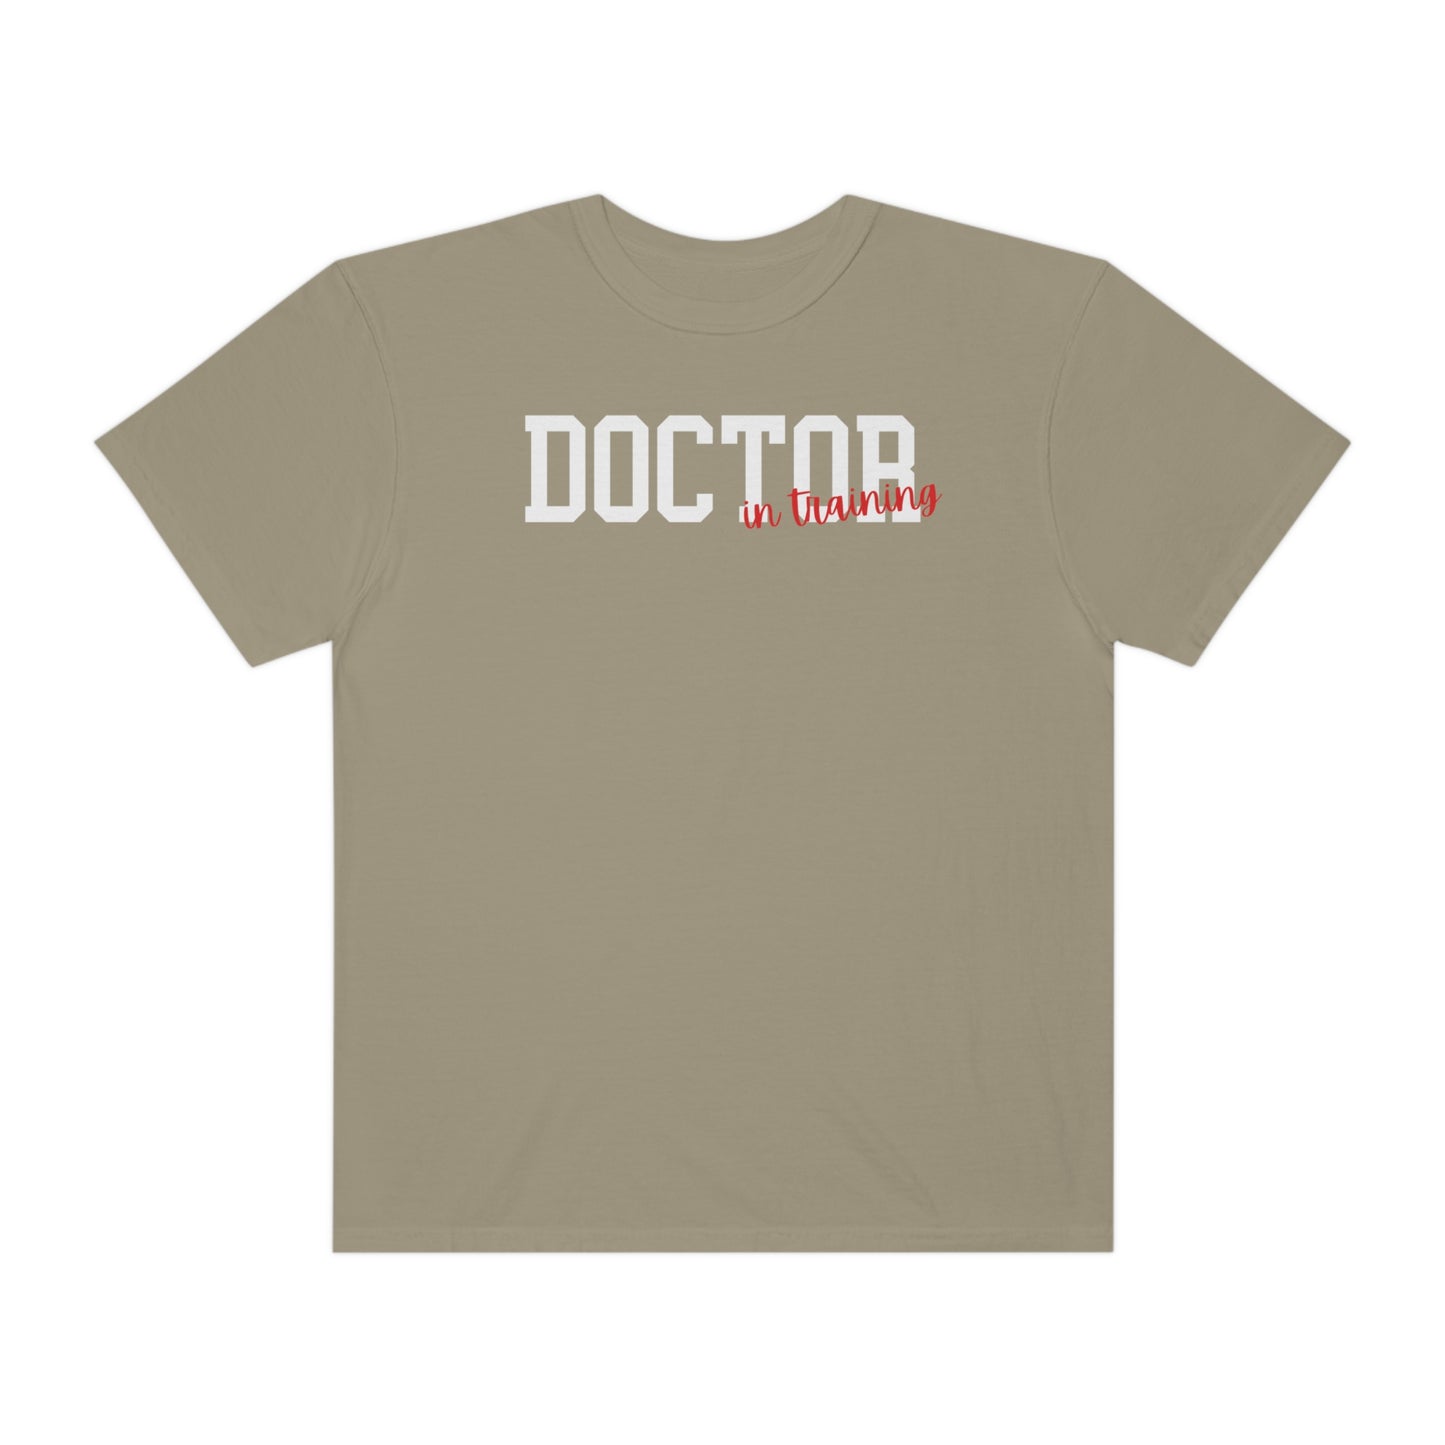 Doctor in Training T-Shirt, Medical Med School Shirt, Almost a Doctor Tee, Med School Gifts, DNP PHD MD Grad Shirt, College Grad Gift